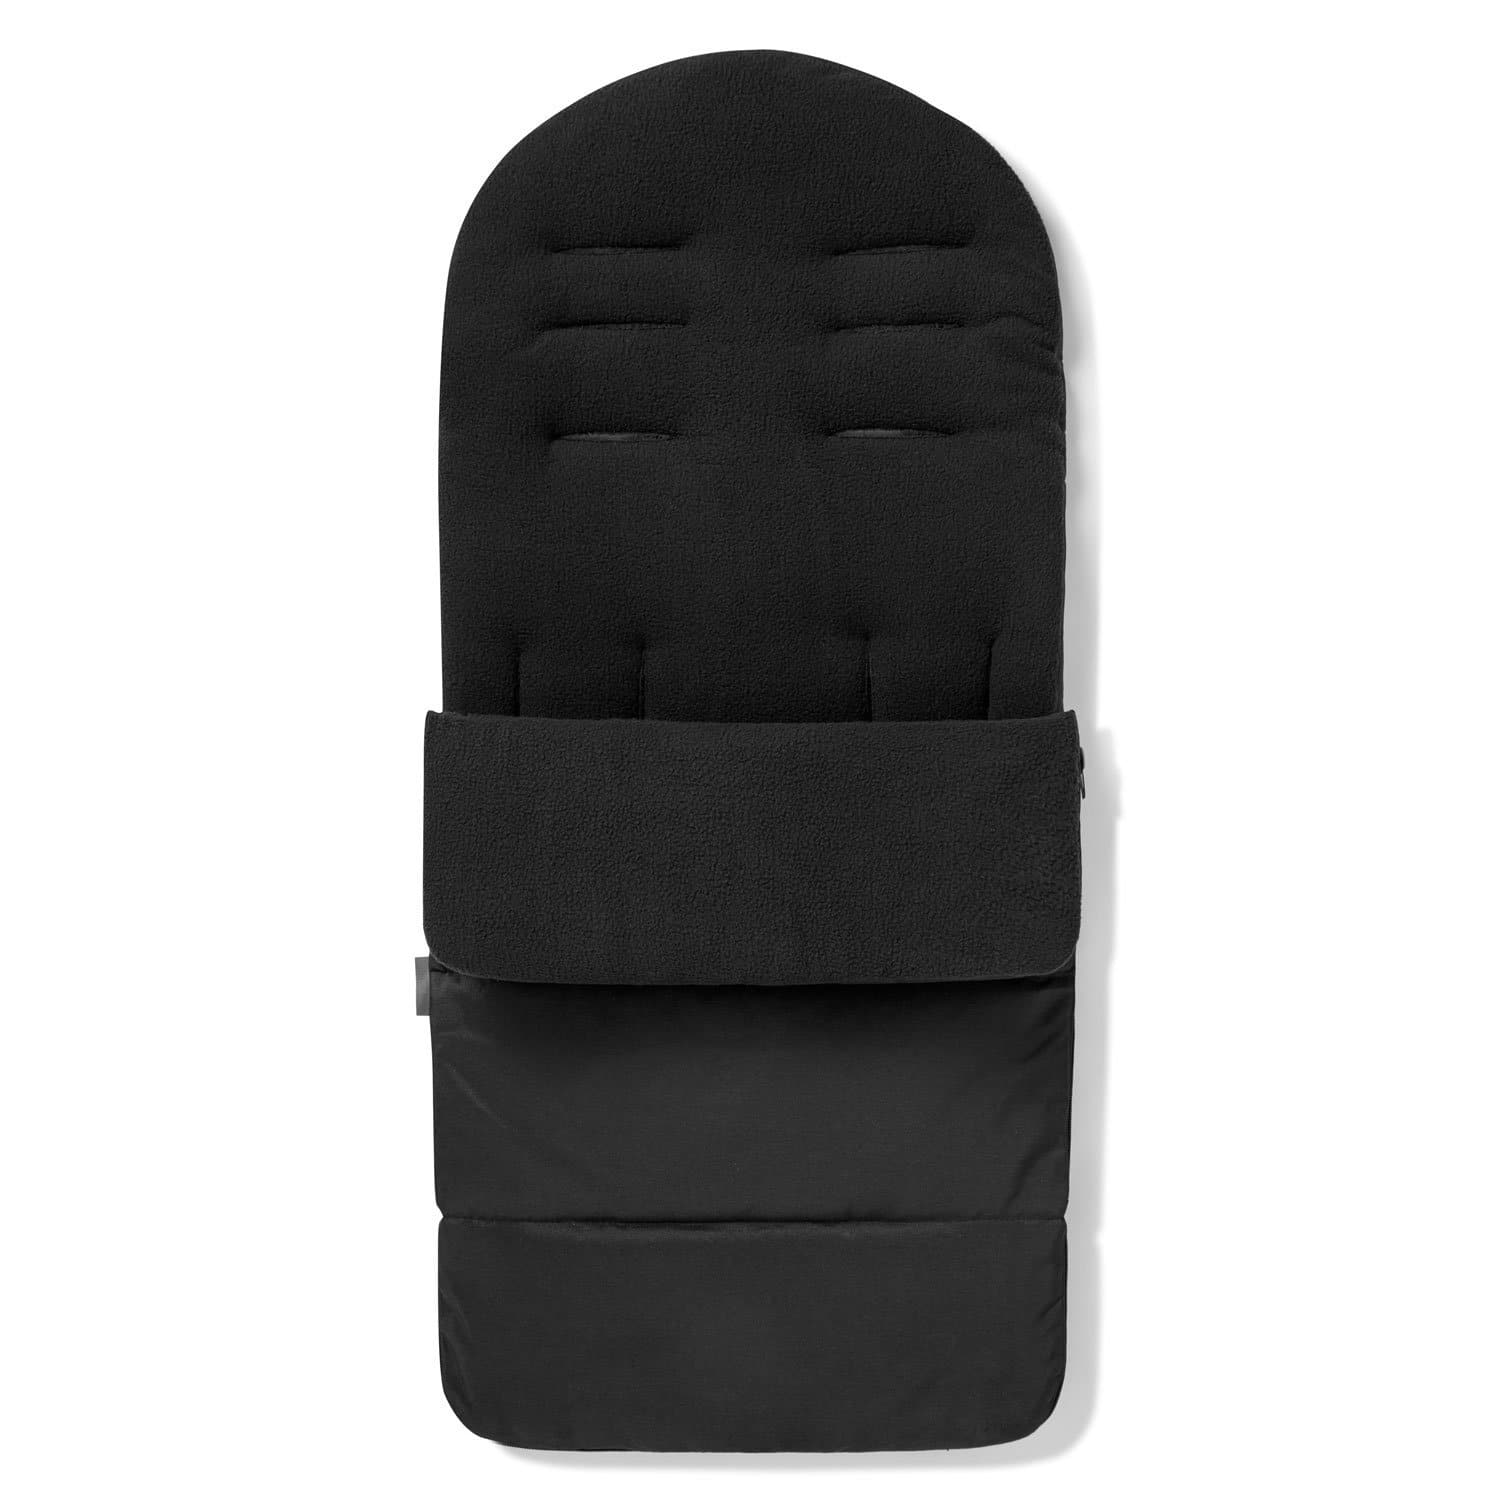 Premium Footmuff / Cosy Toes Compatible with Koelstra - Black Jack / Fits All Models | For Your Little One